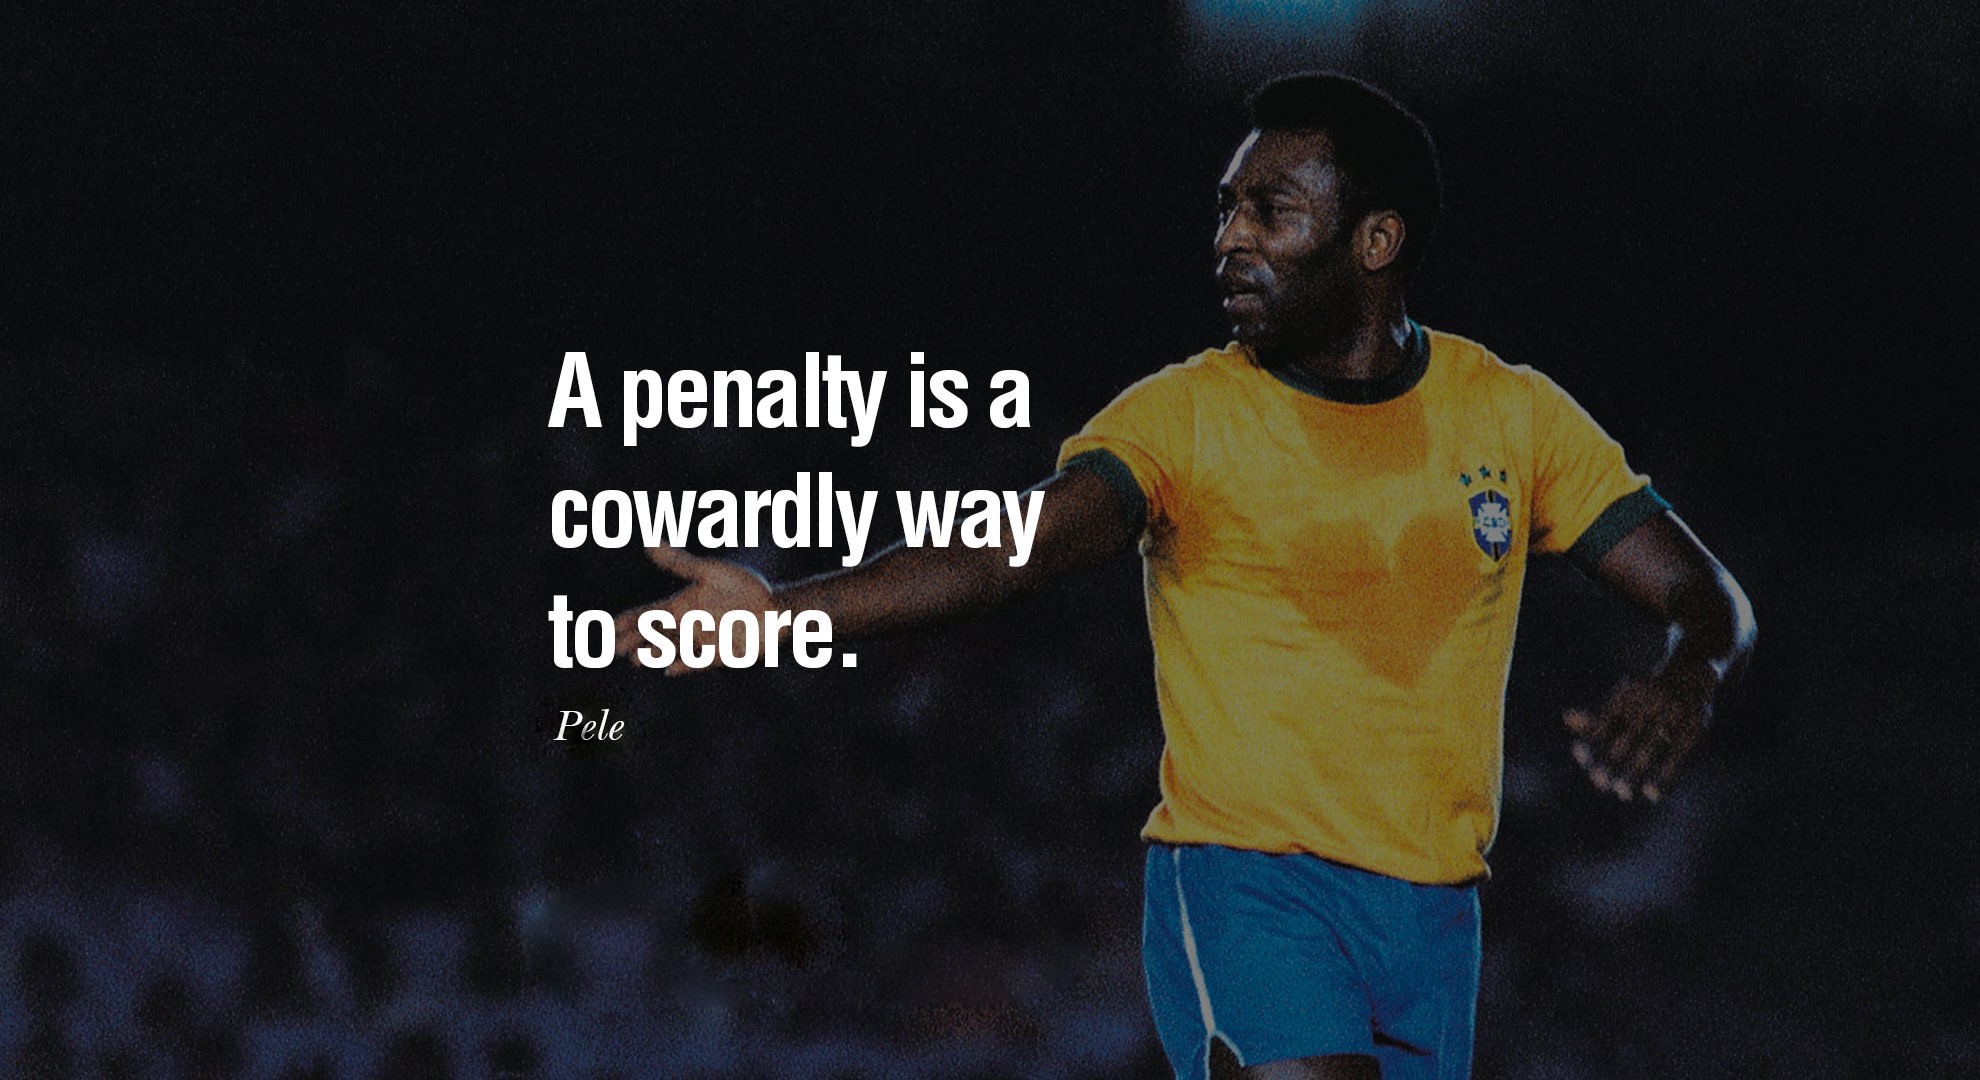 pele football quote download hd picture